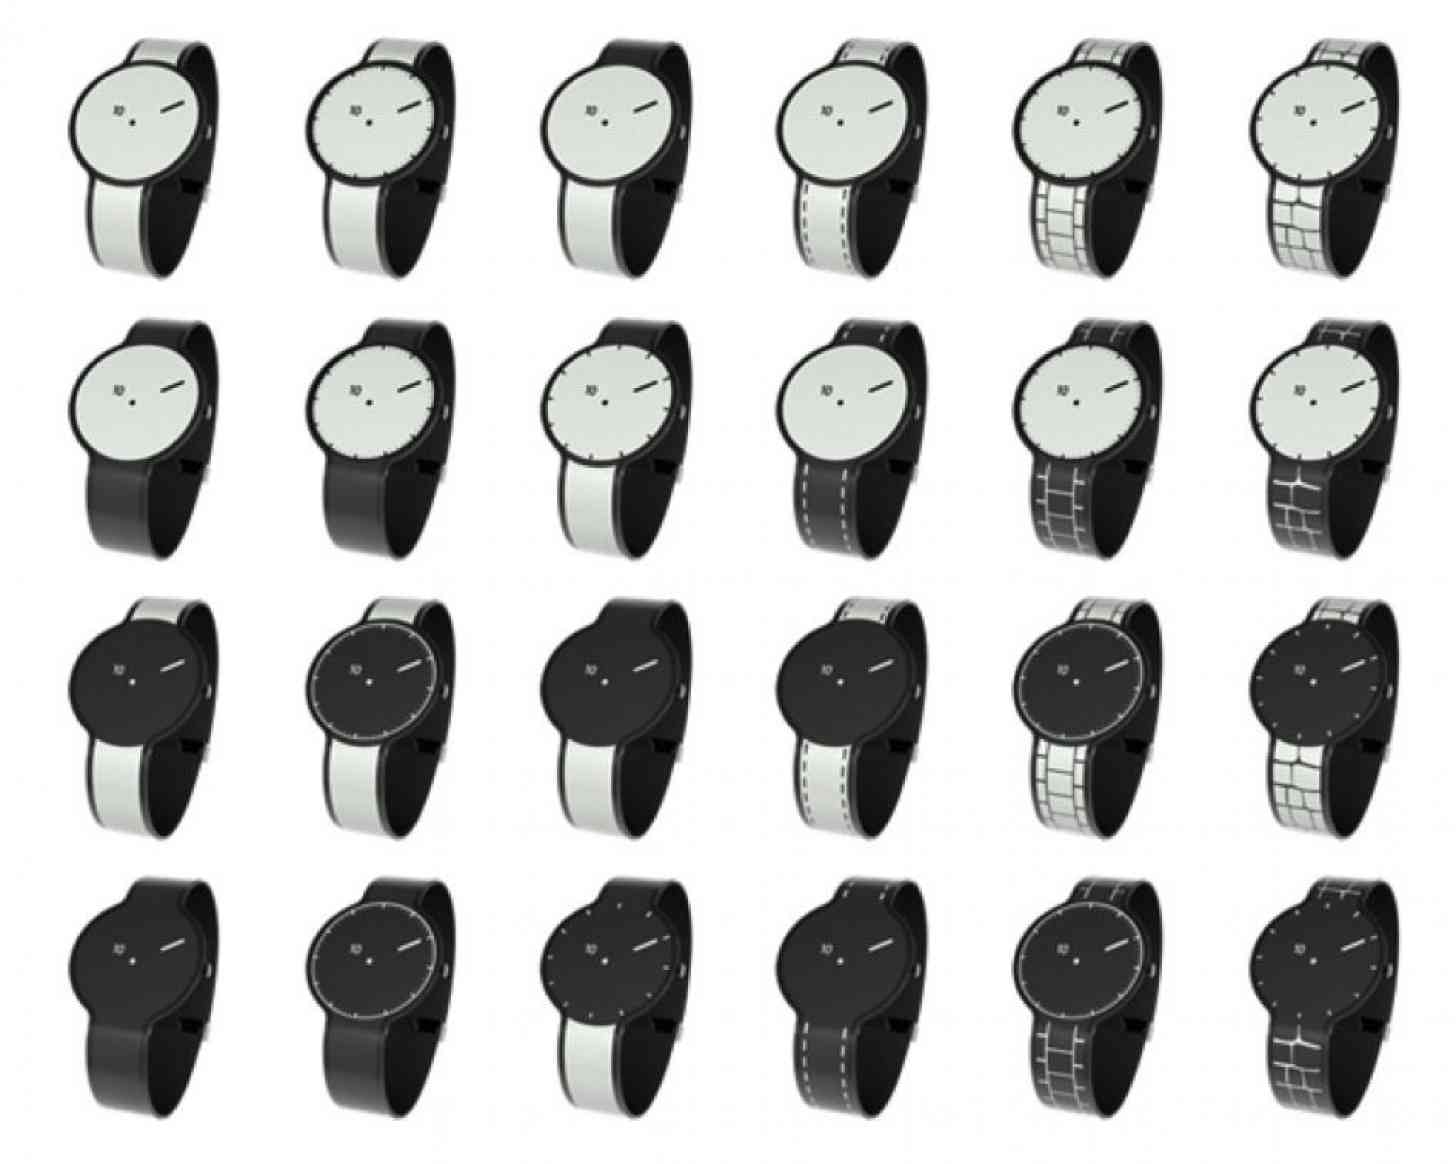 Sony FES Watch faces and bands